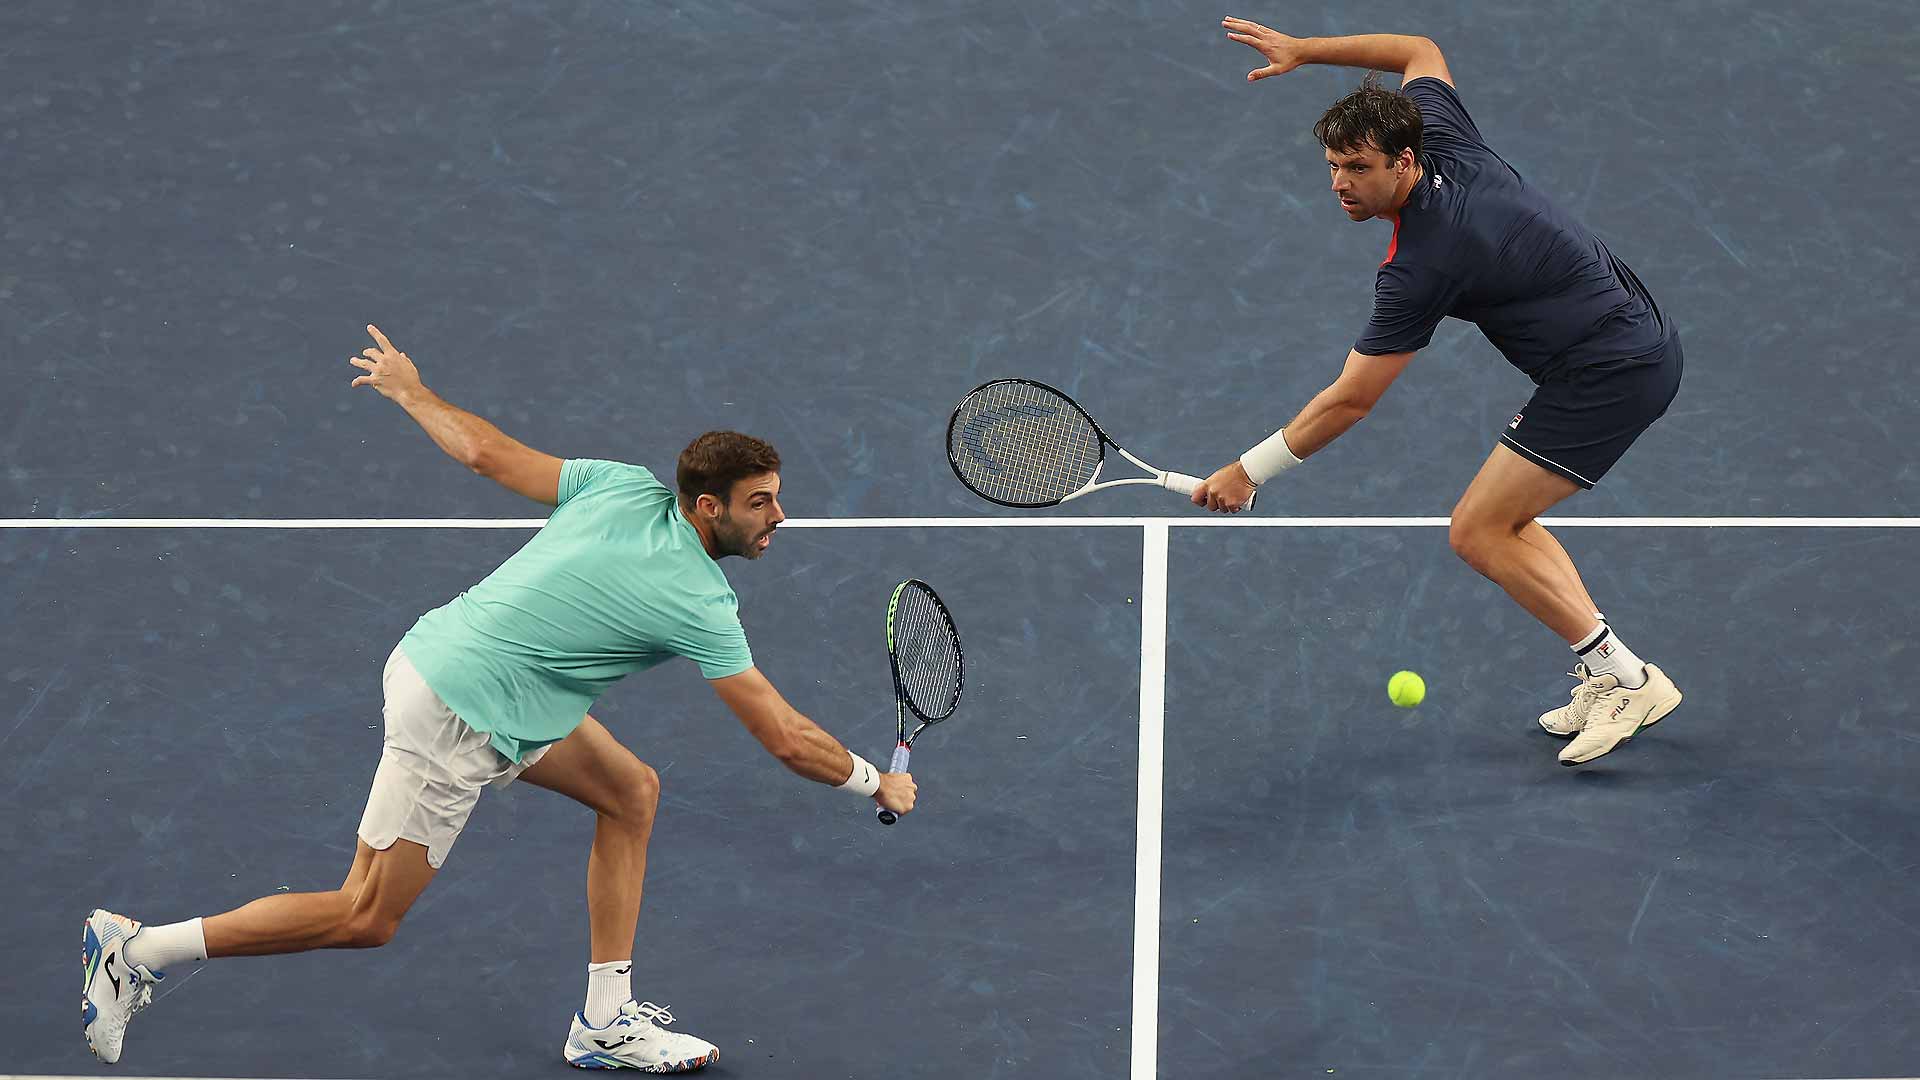 Marcel Granollers and Horacio Zeballos clinch semi-final victory on Friday at the Rolex Shanghai Masters.